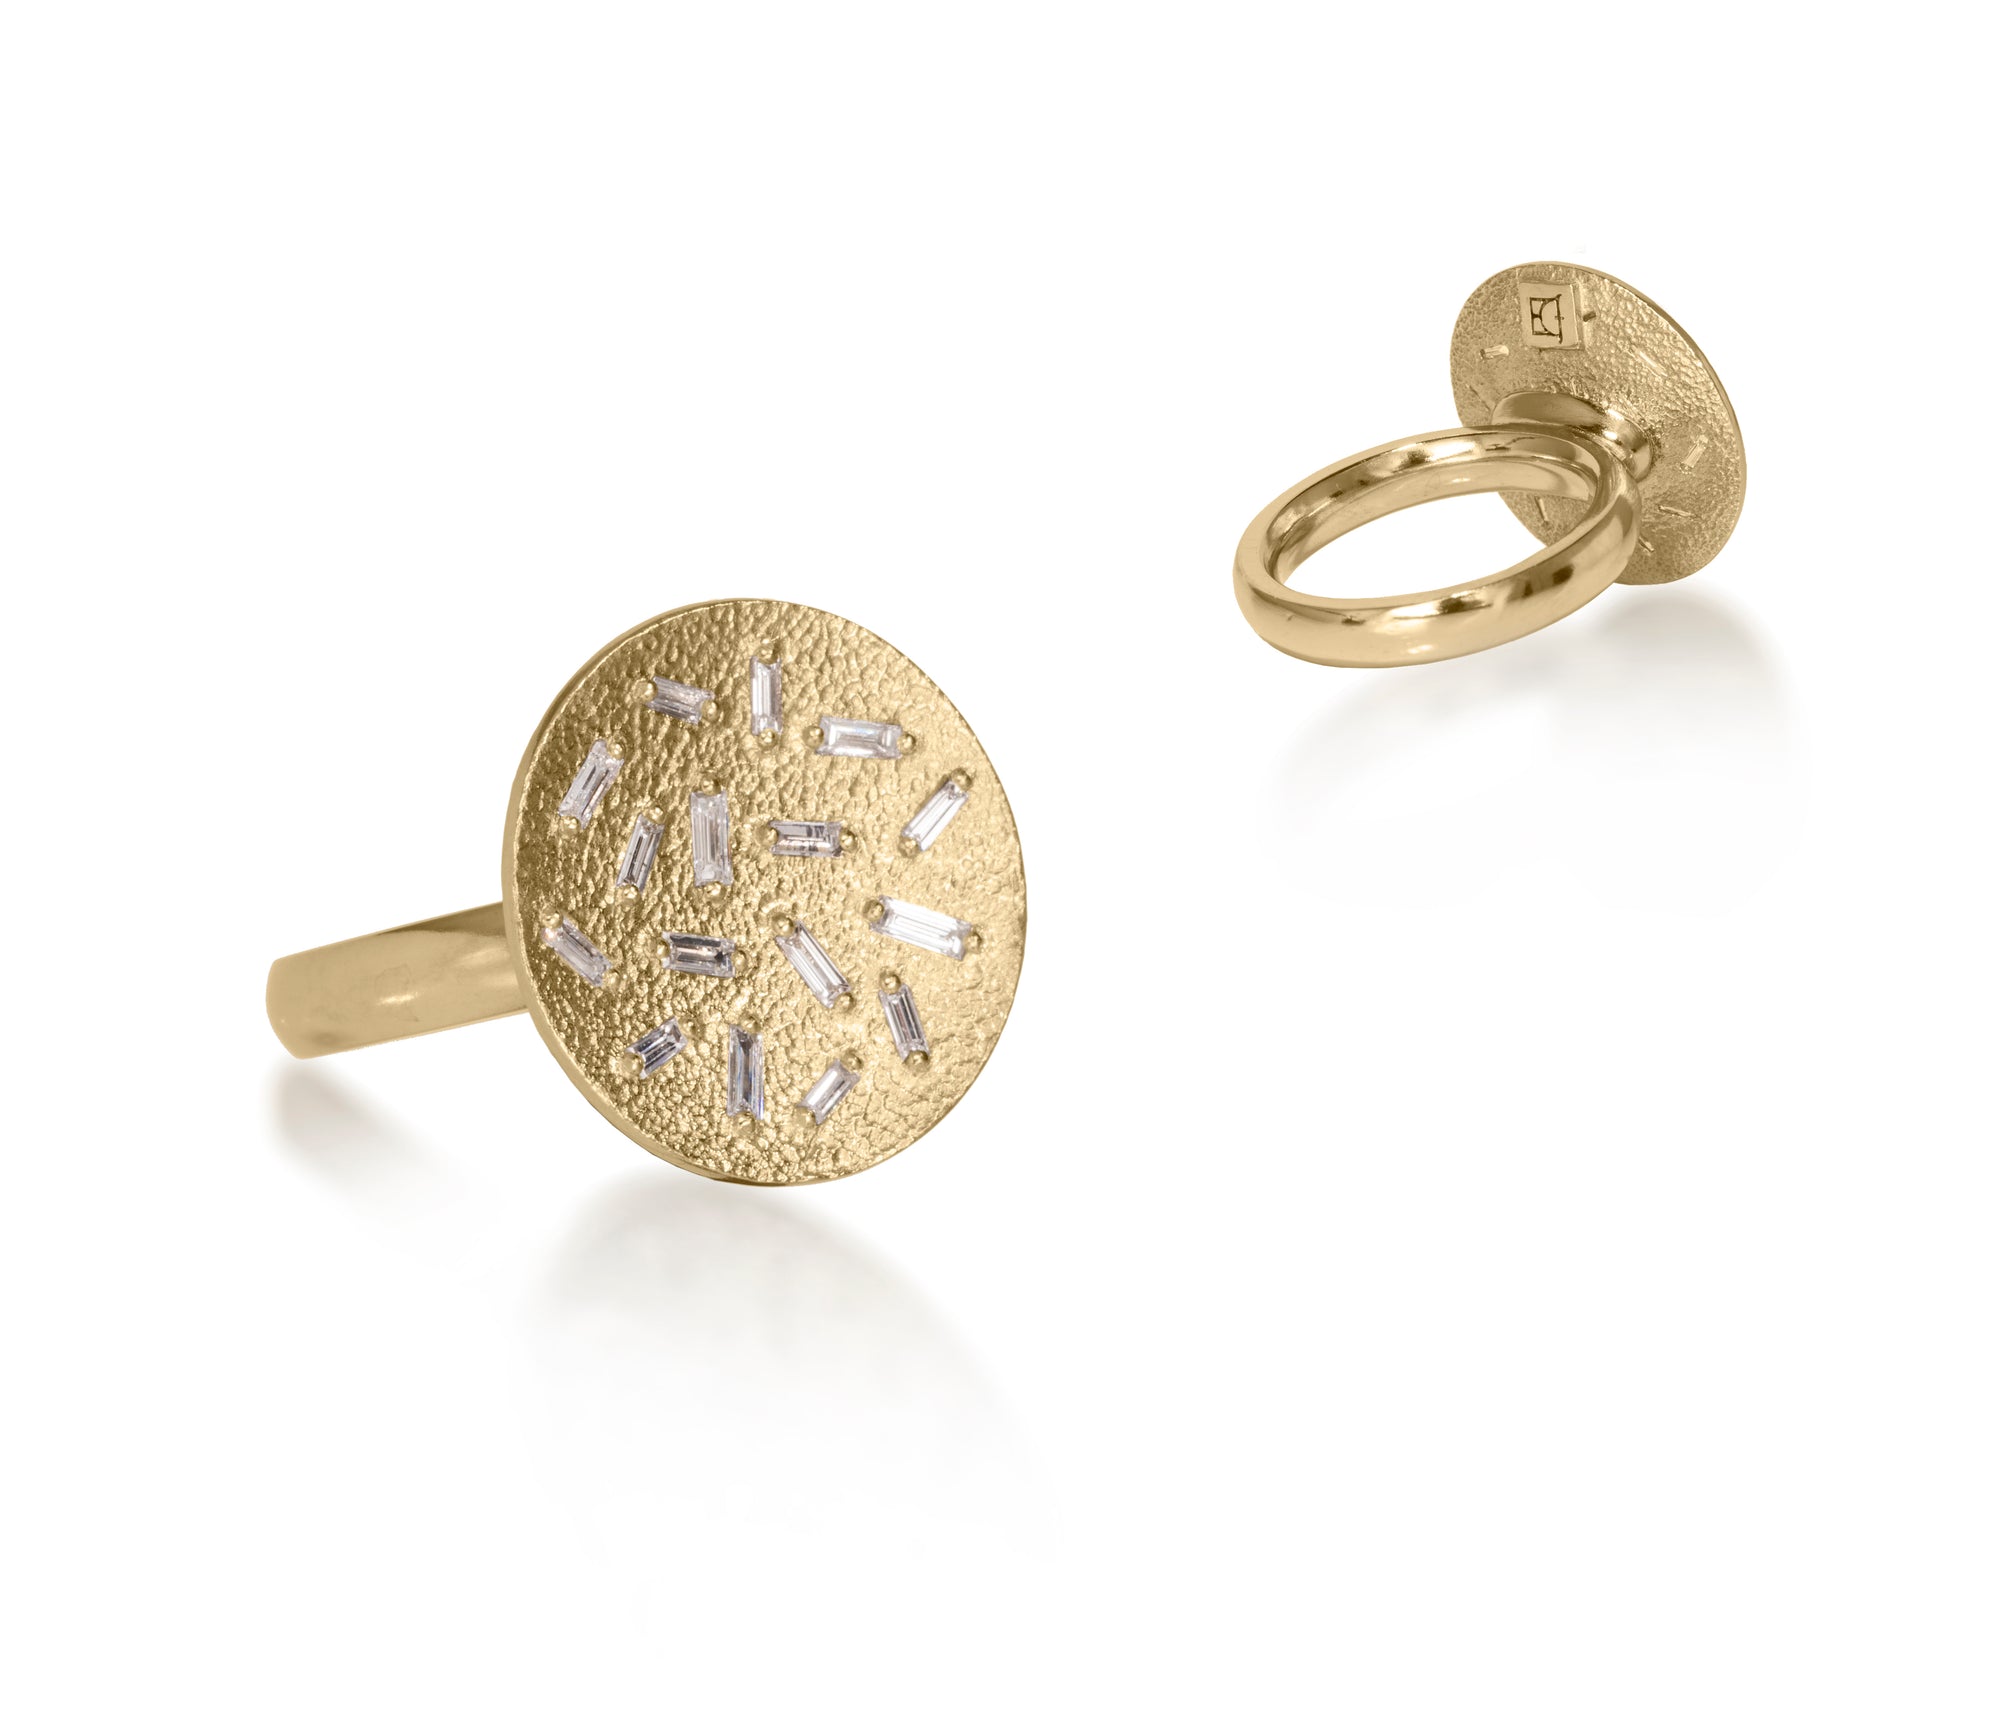 This medium circular pendant ring is set with 16 white diamond baguettes. It is available in three richly textured color ways, oxidized silver, 18k gold and palladium.  The random angles of the baguettes catch the light in exciting ways when worn. 0.435 tcw.